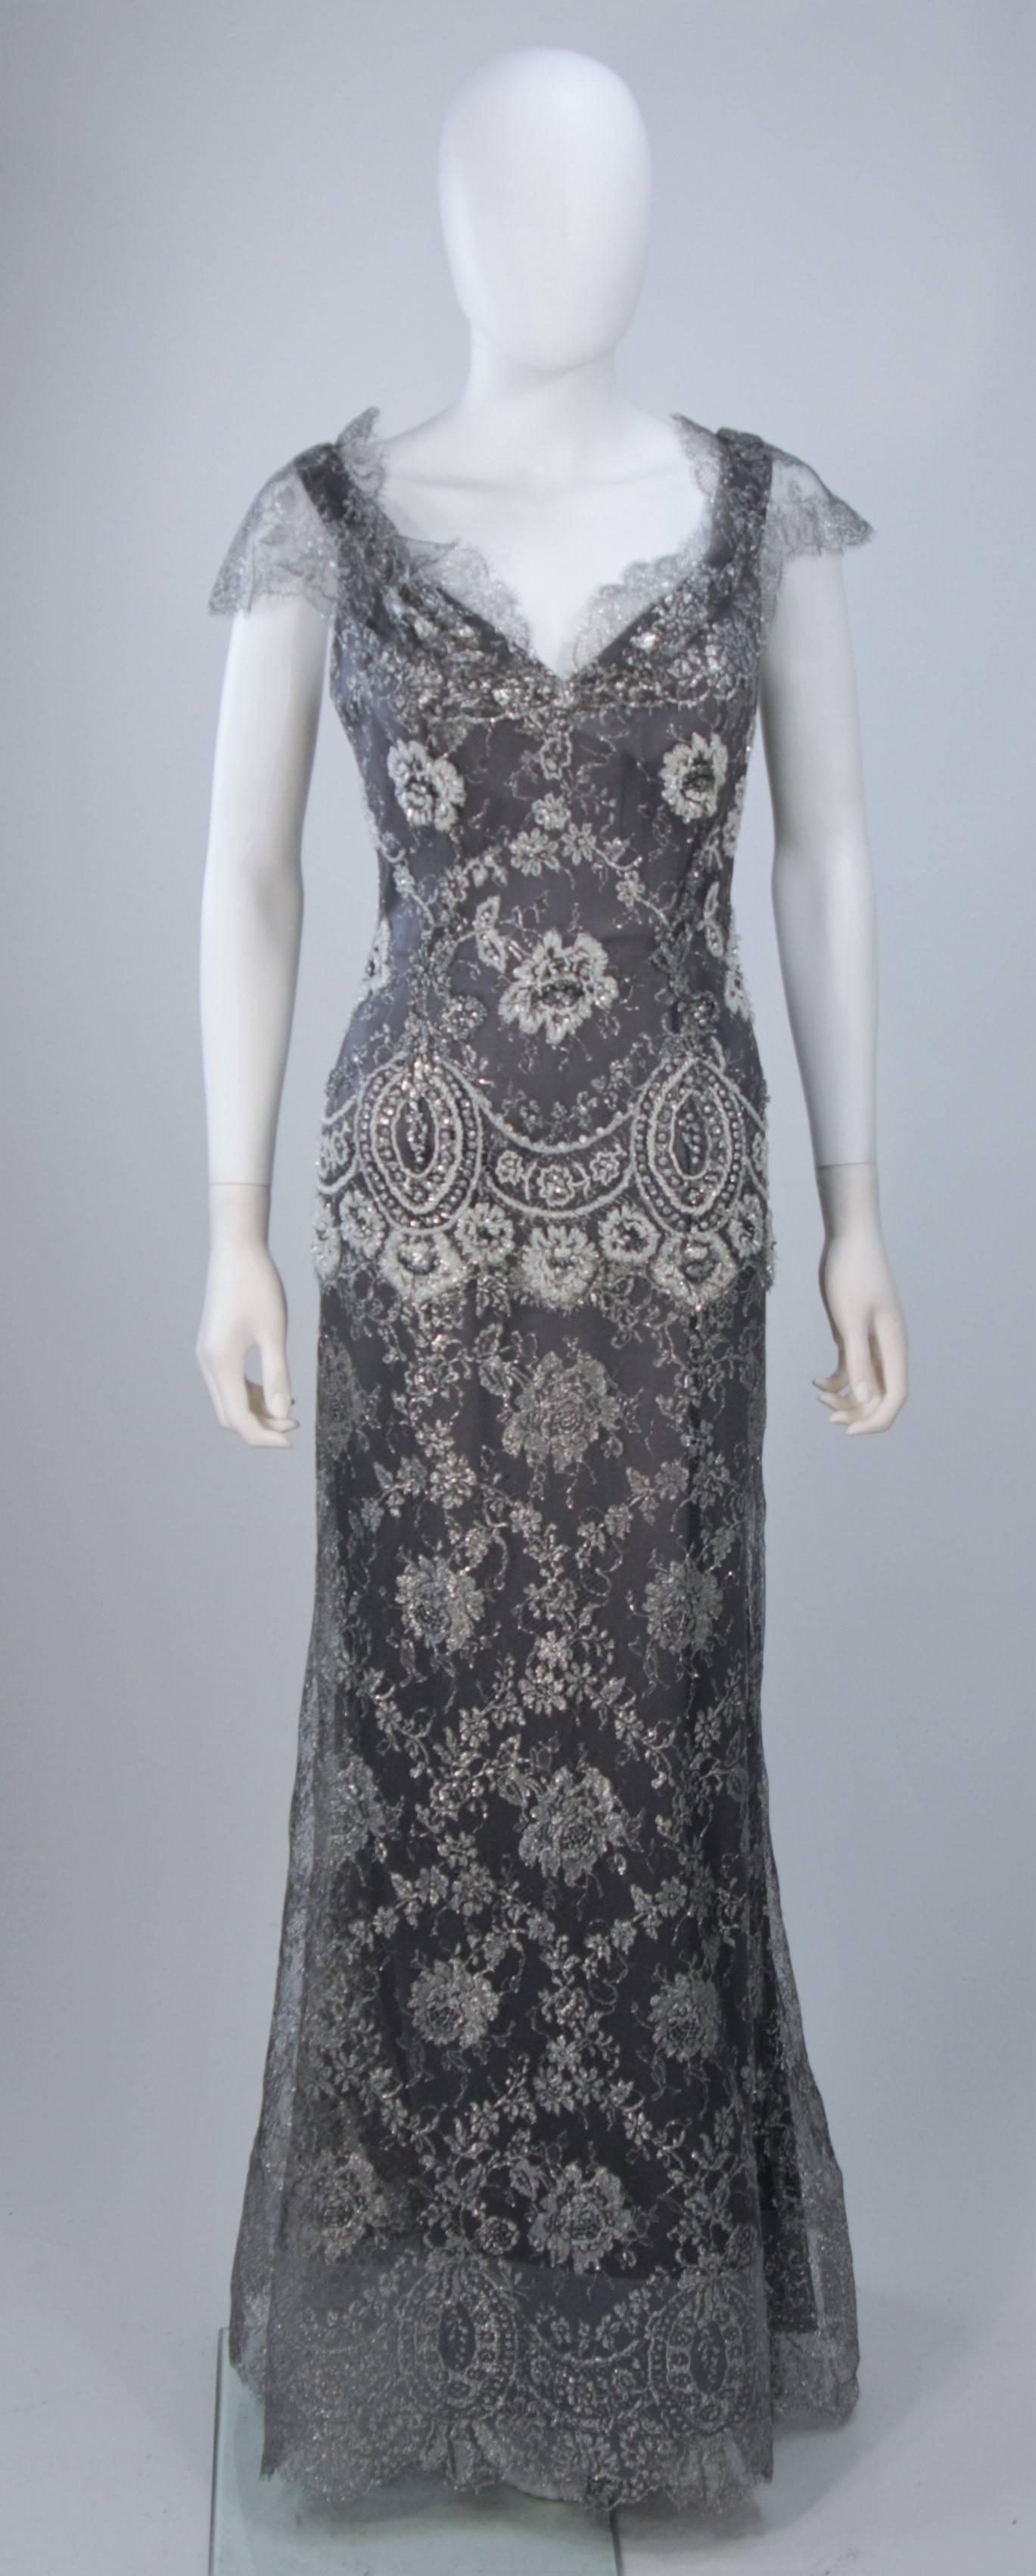  This Fe Zandi  gown is composed of a silver lame lace with scalloped edges. Features a draped neckline with sheer sleeve. There is a center back zipper closure, horse hair hem, and silk lining. In excellent vintage condition. 

**Please